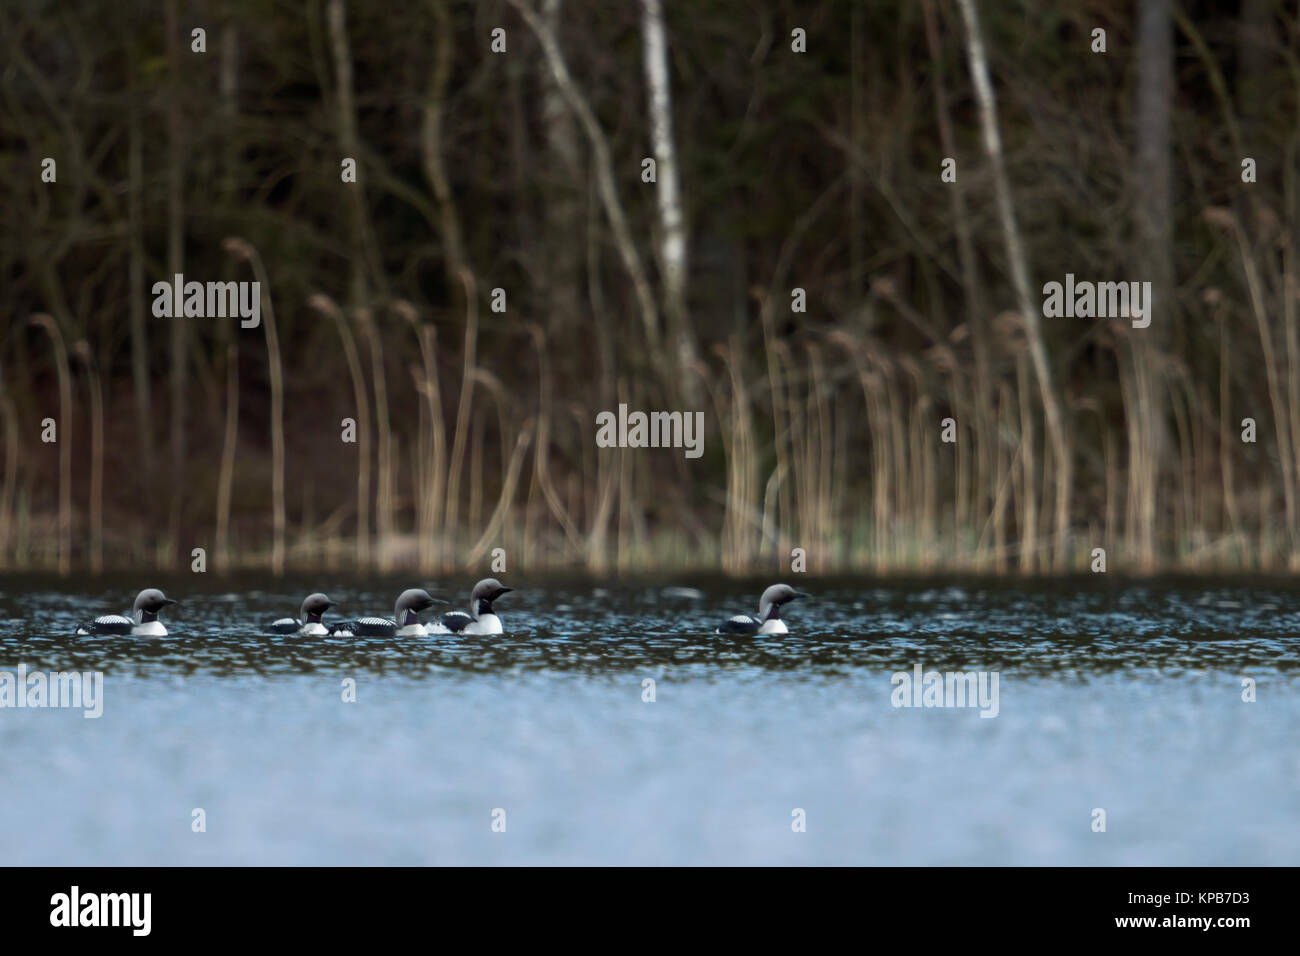 Black-throated Loon / Arctic Loon / Prachttaucher ( Gavia arctica ), little group, flock, swimming on a lake in Sweden, courting together, Scandinavia Stock Photo